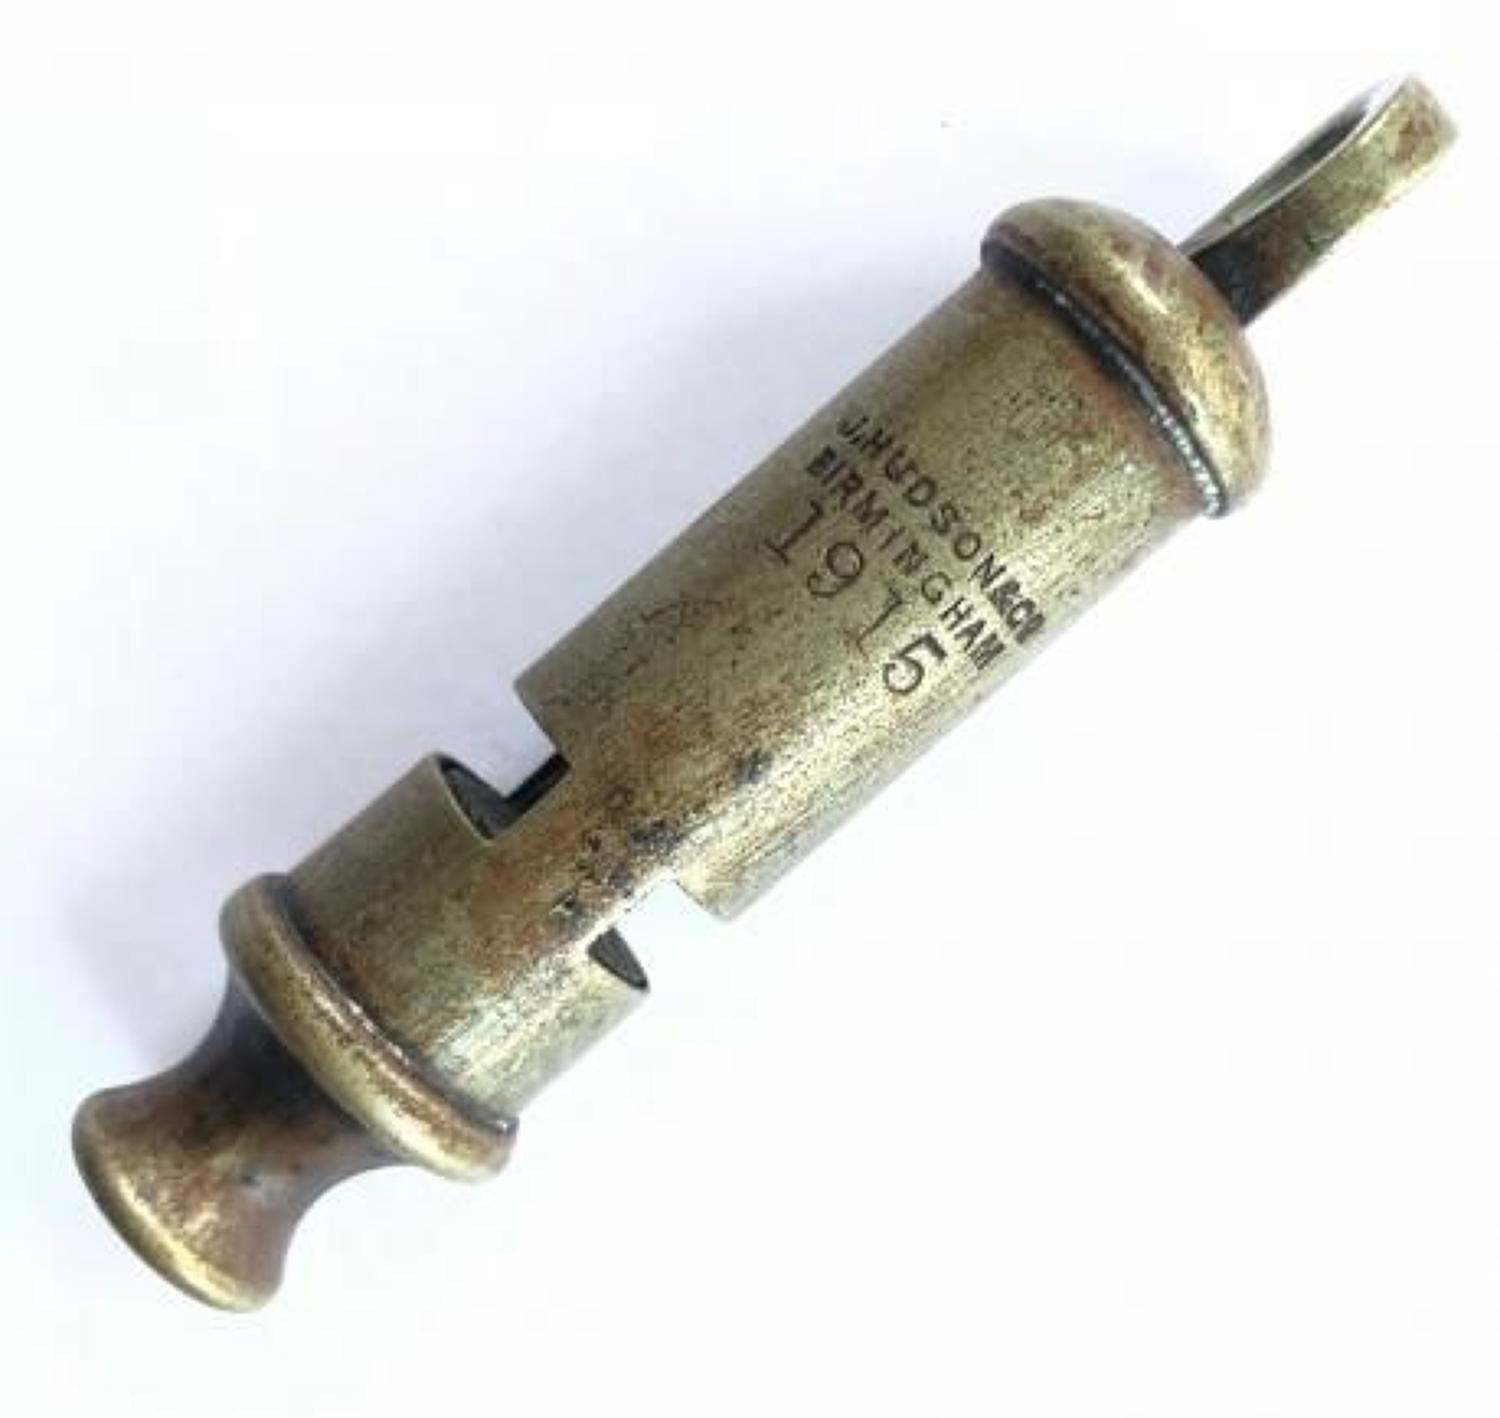 WW1 British Army 1915 Trench Whistle.